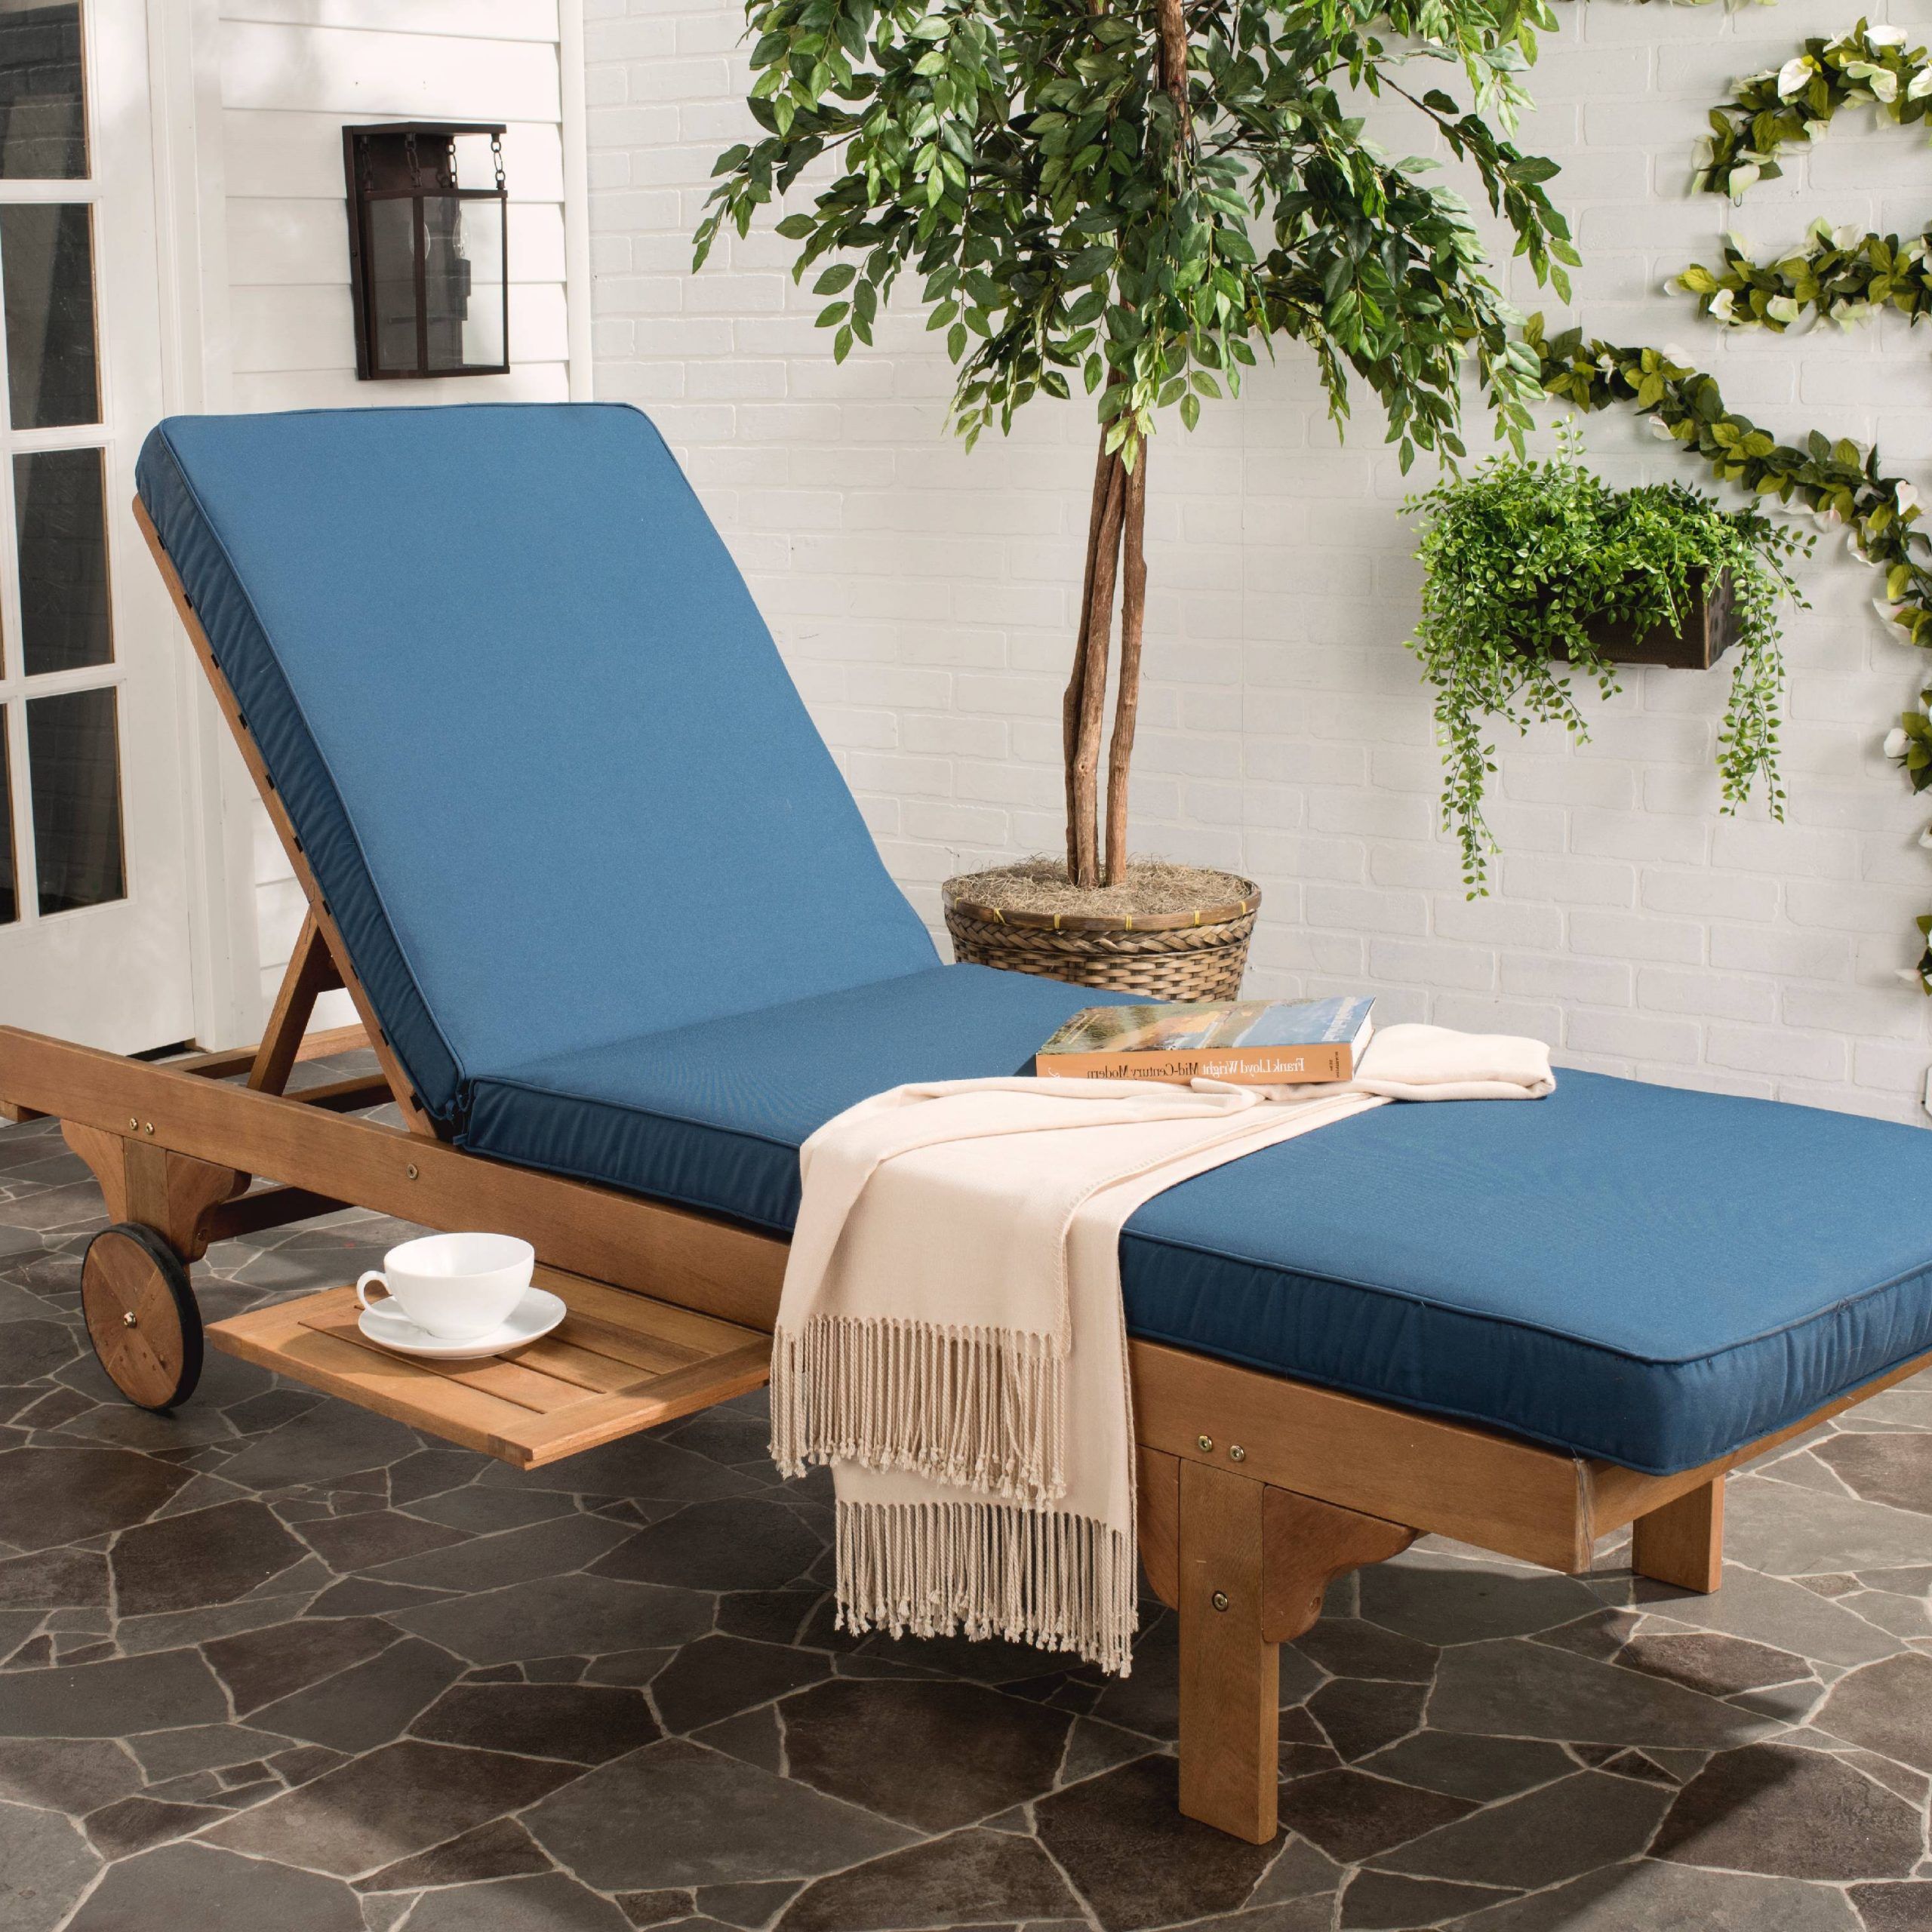 Favorite Safavieh Newport Outdoor Modern Chaise Lounge Chair With Cushion Intended For Natural Wood Outdoor Lounger Chairs (View 3 of 15)